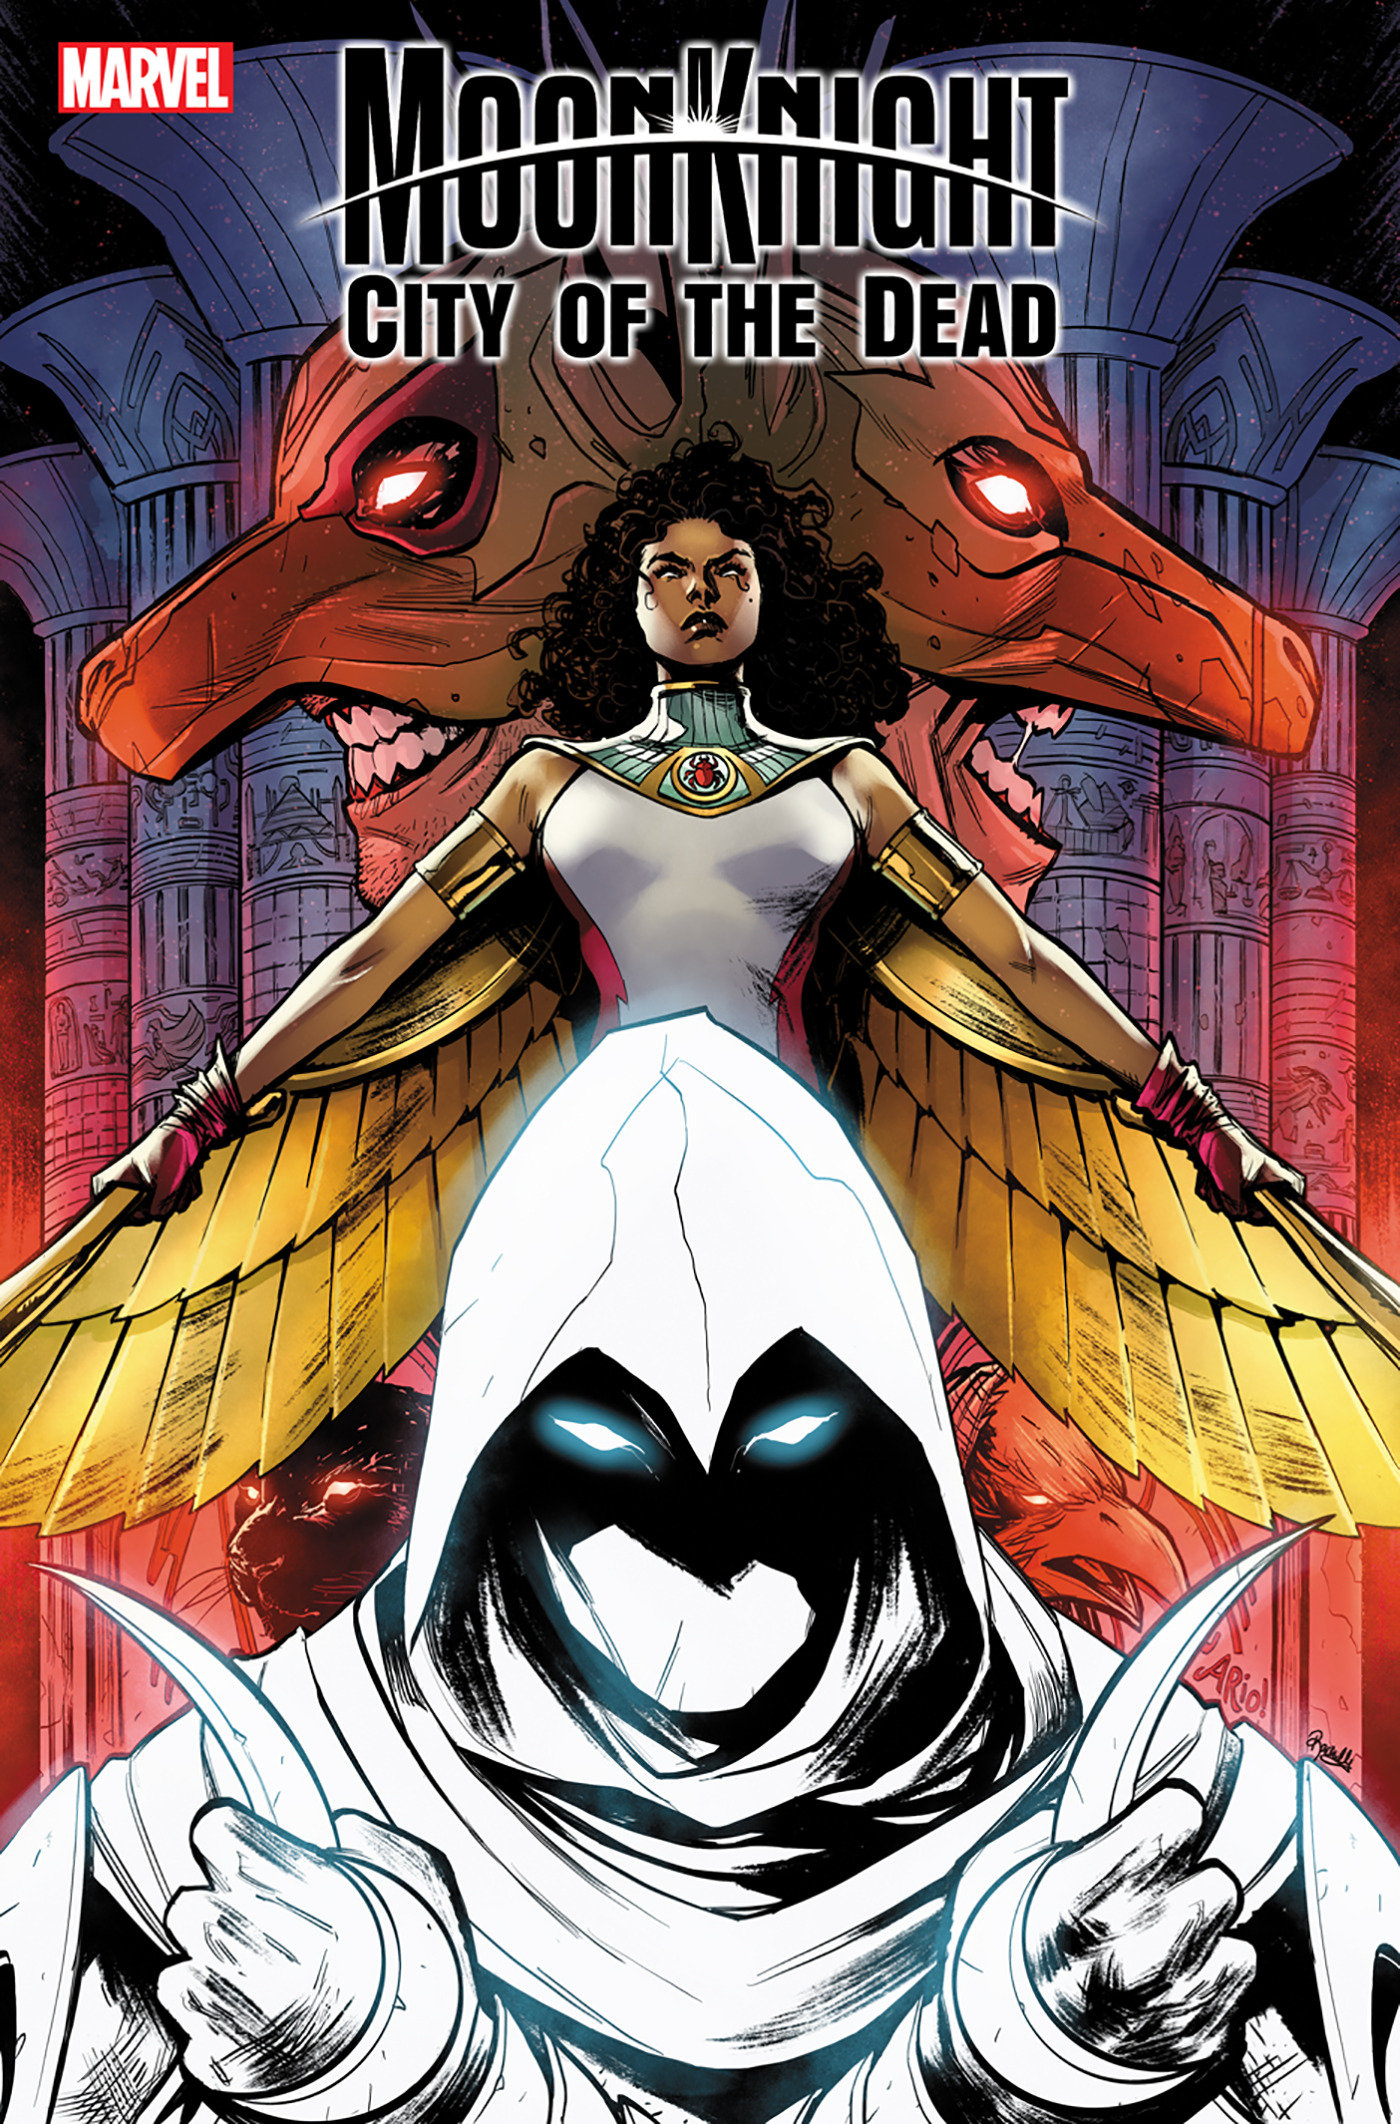 Moon Knight: City of the Dead #3 Ario Anindito 1 for 25 Incentive